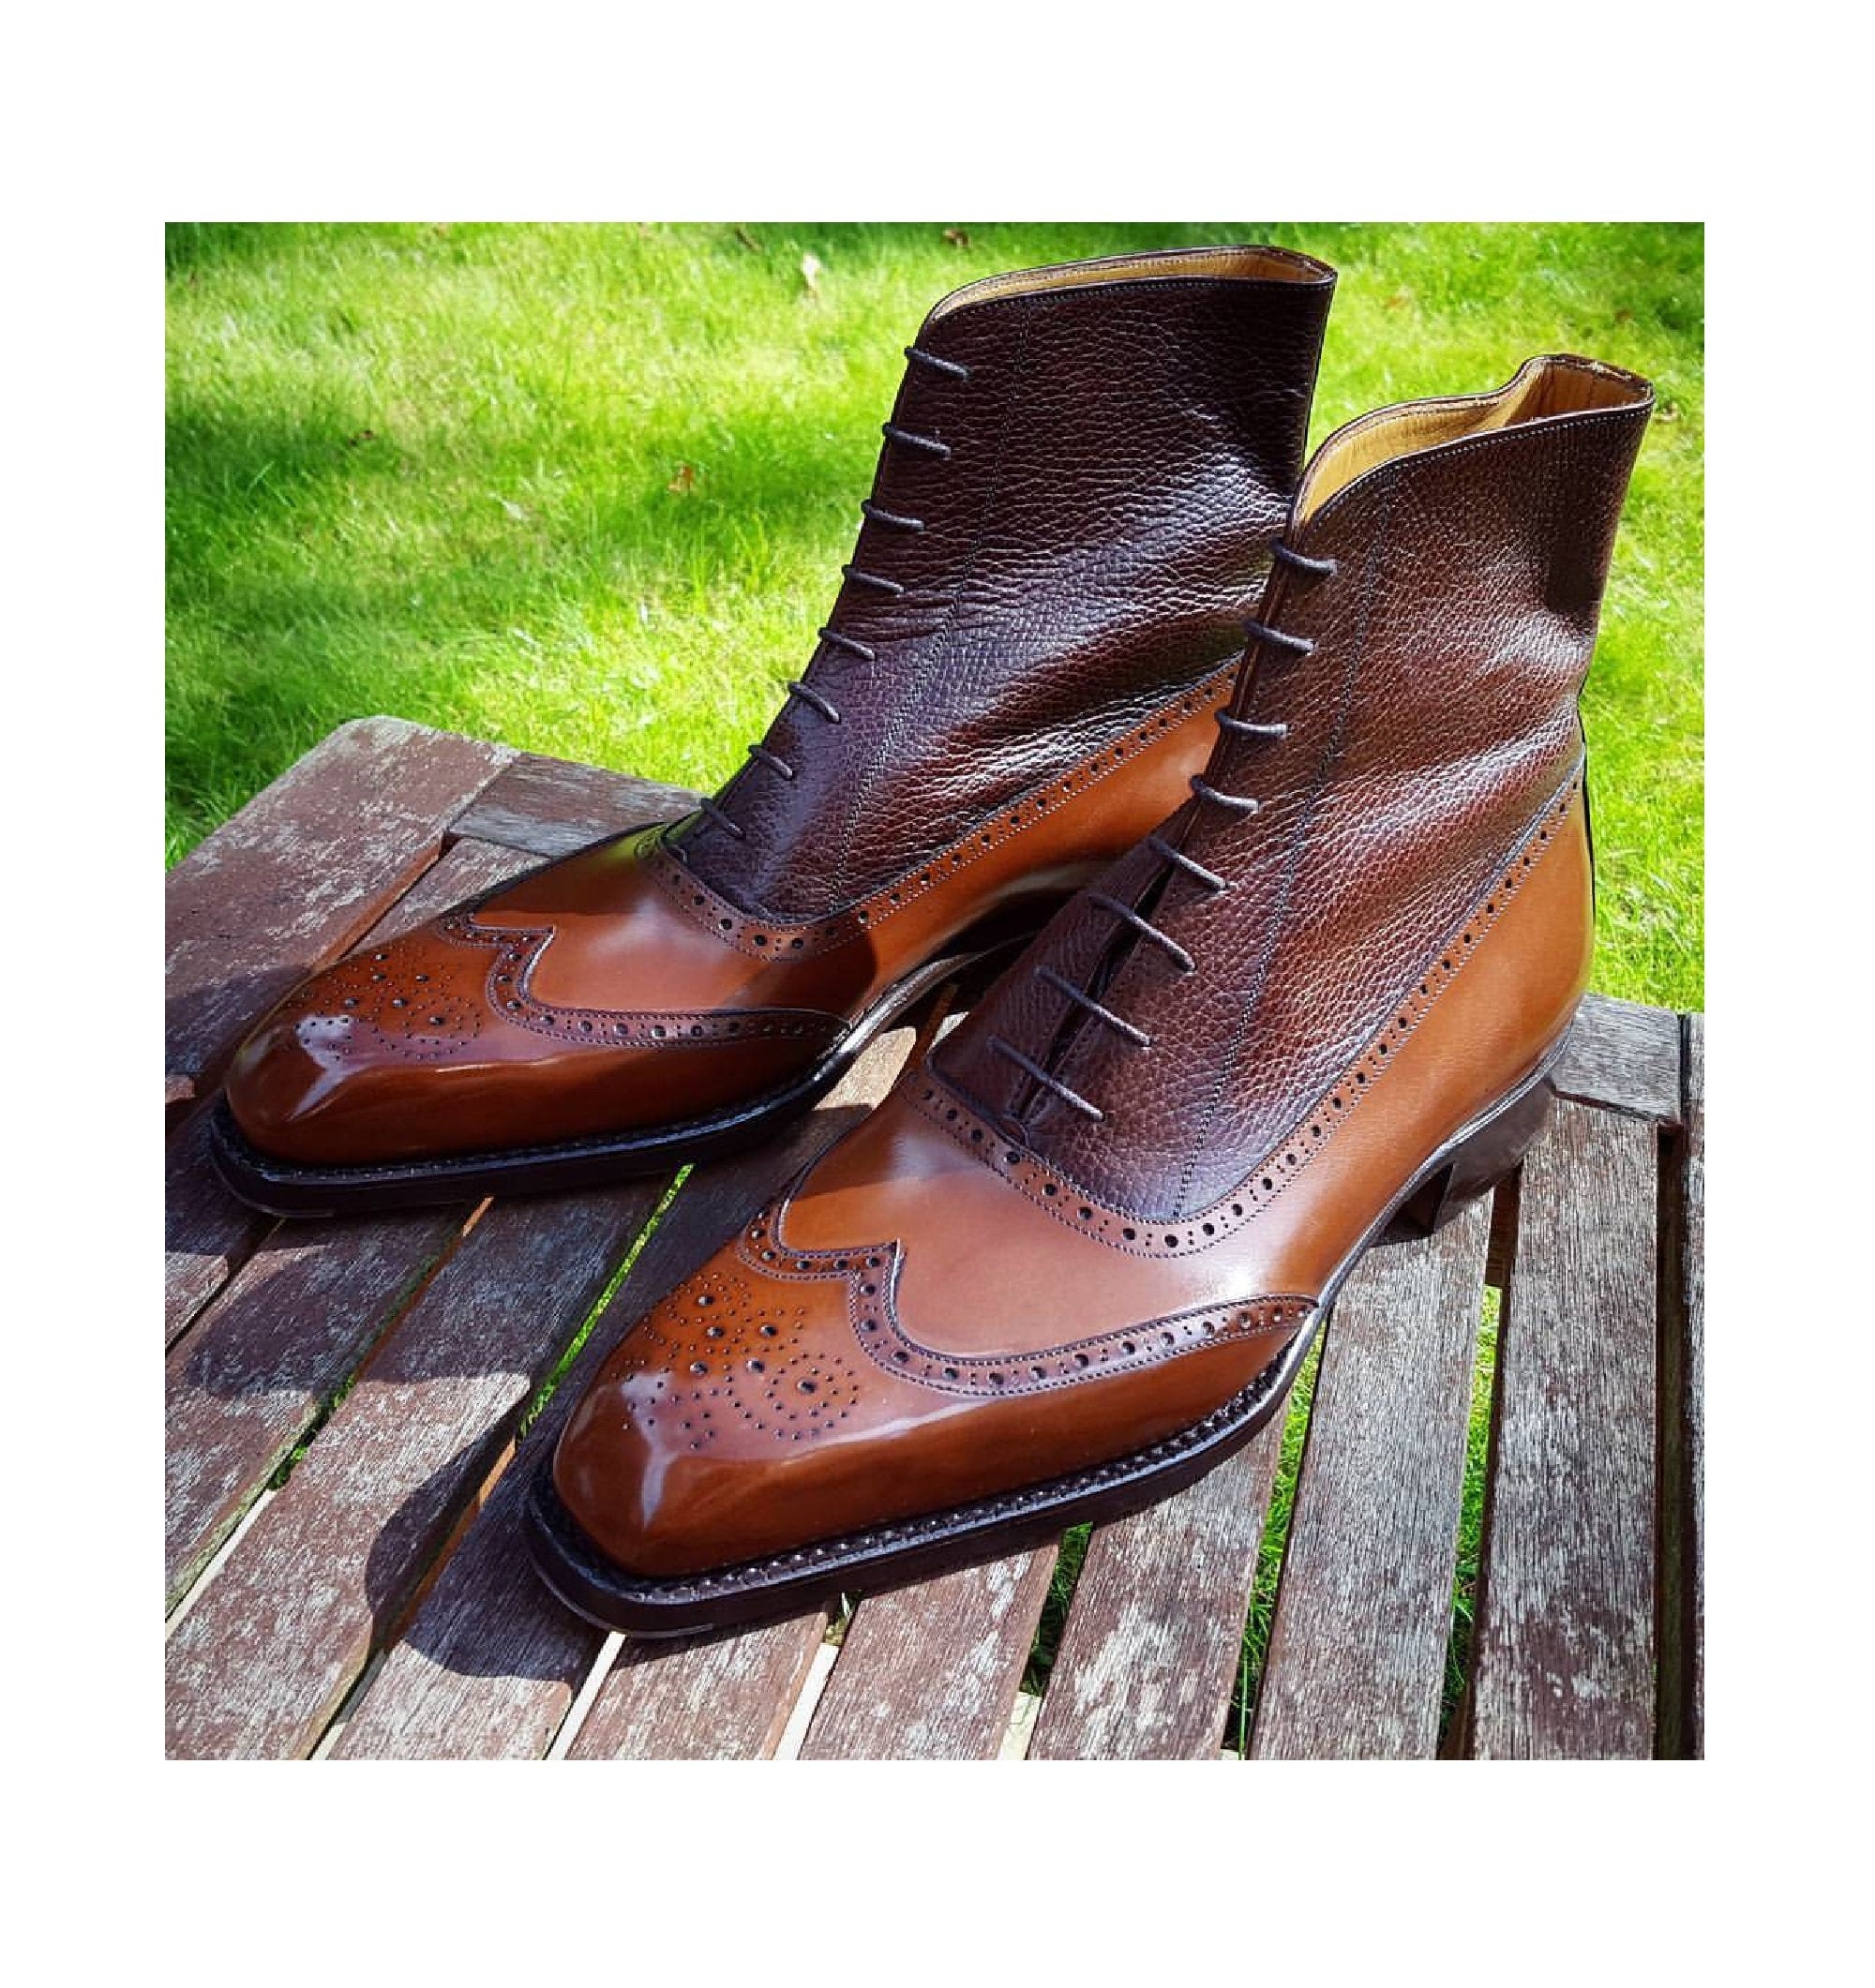 Bespoke Handmade Men's Brown Color Genuine Leather Wing Tip Brogues Lace Up Ankle High Boots